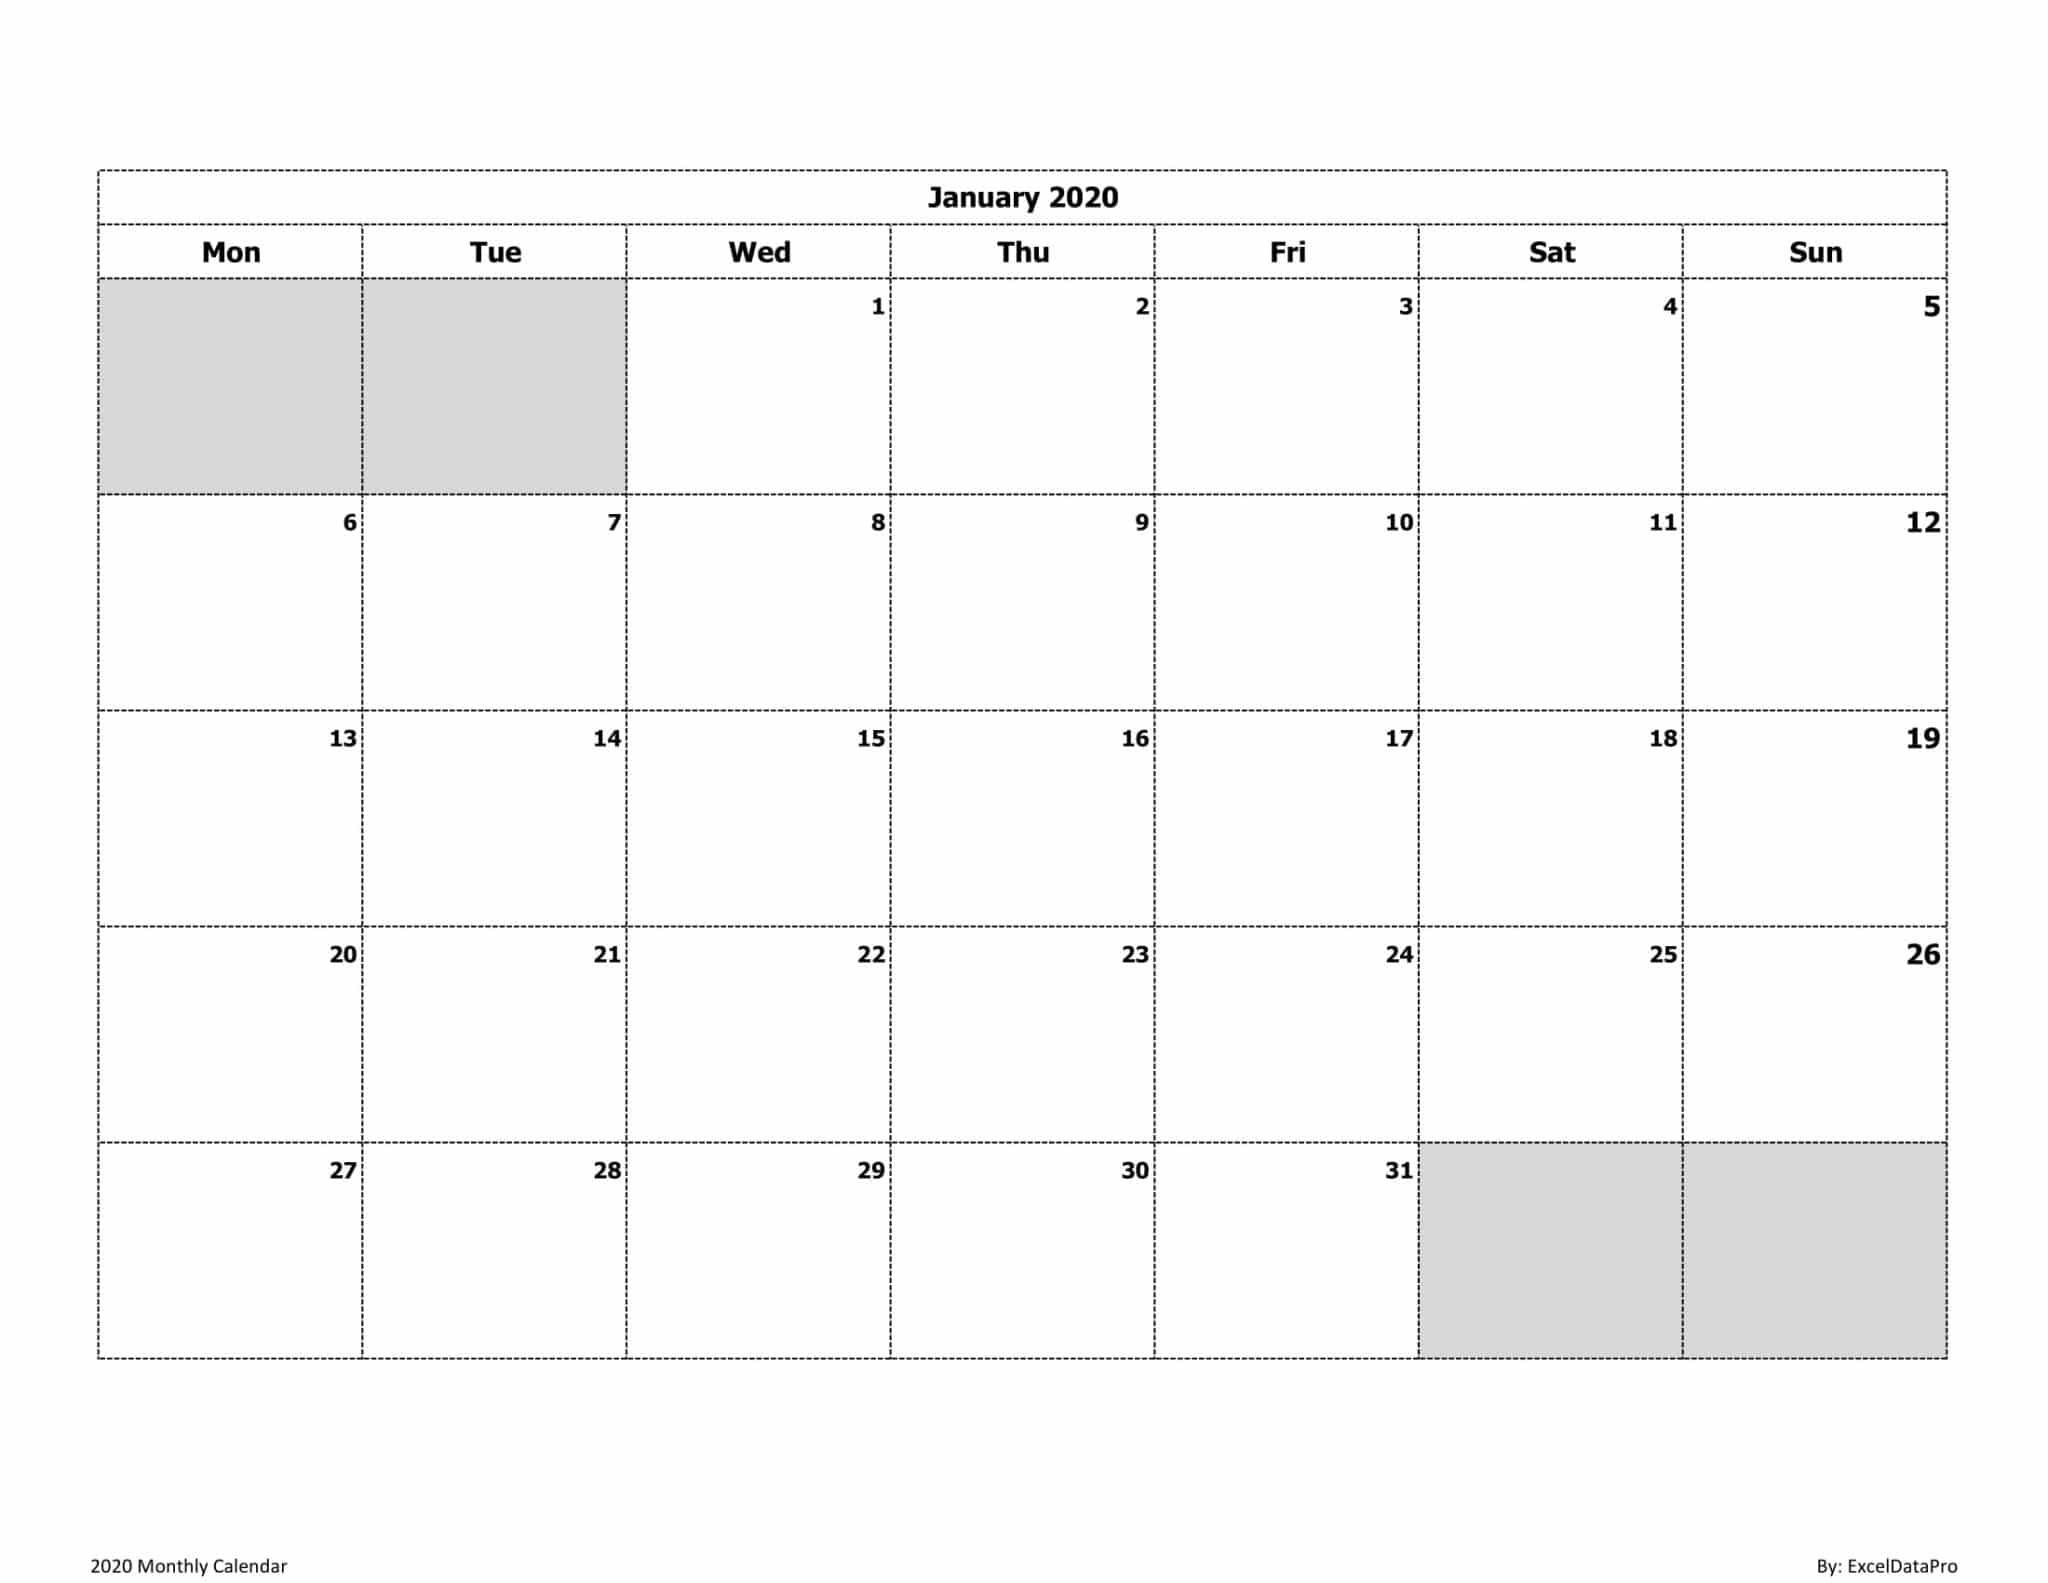 Remarkable Monthly Calendar Starting On Monday In 2020 with Remarkable Calendar Template